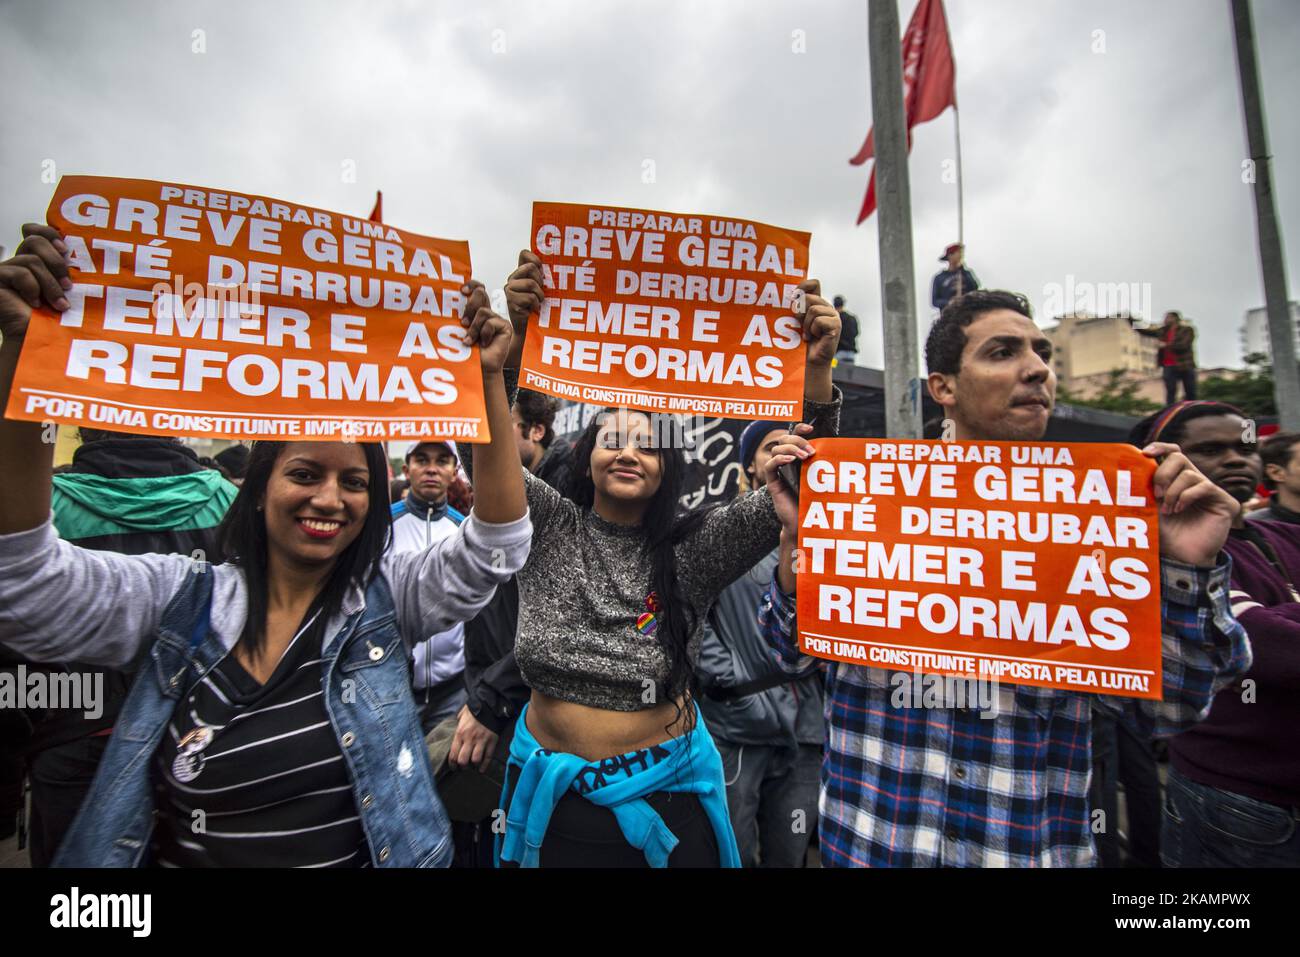 Demonstrators take part in a national strike against a labour and social welfare reform bill that the government of President Michel Temer intends to pass, in Sao Paulo, Brazil, on April 28, 2017. Major transportation networks schools and banks were partially shut down across much of Brazil on Friday in what protesters called a general strike against austerity reforms in Latin America's biggest country.(Photo: Cris Faga/ Con) (Photo by Cris Faga/NurPhoto) *** Please Use Credit from Credit Field *** Stock Photo